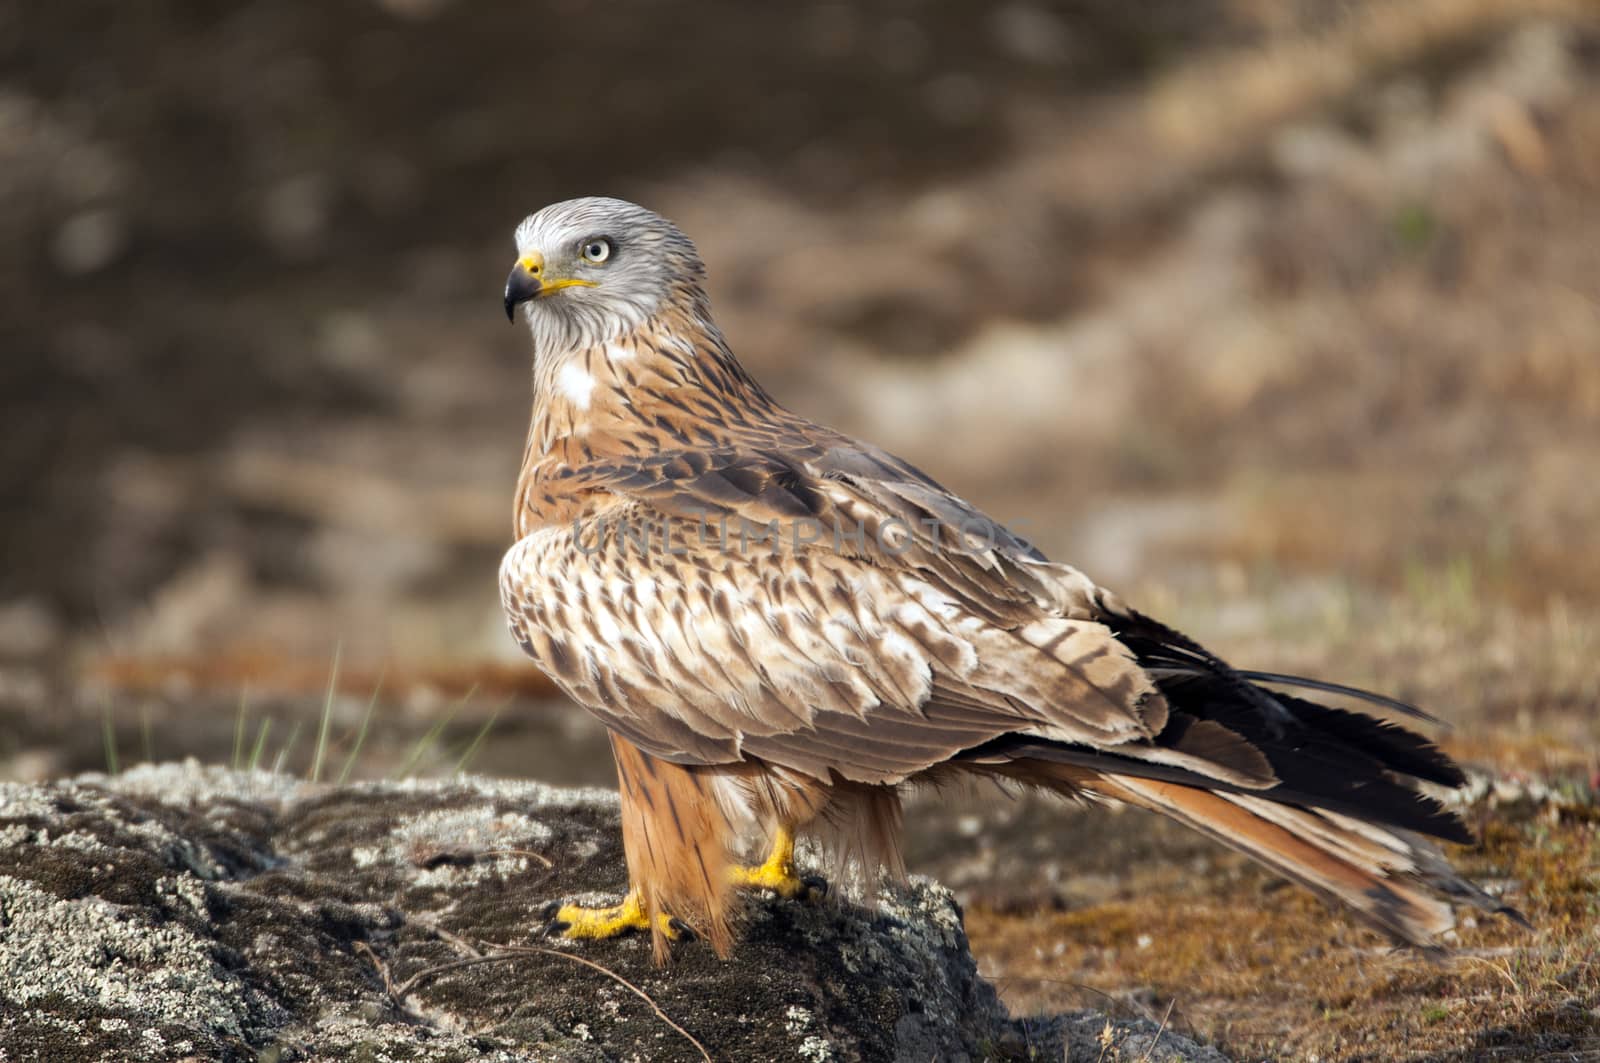 Red kite, Milvus milvus, standing on a rock by jalonsohu@gmail.com